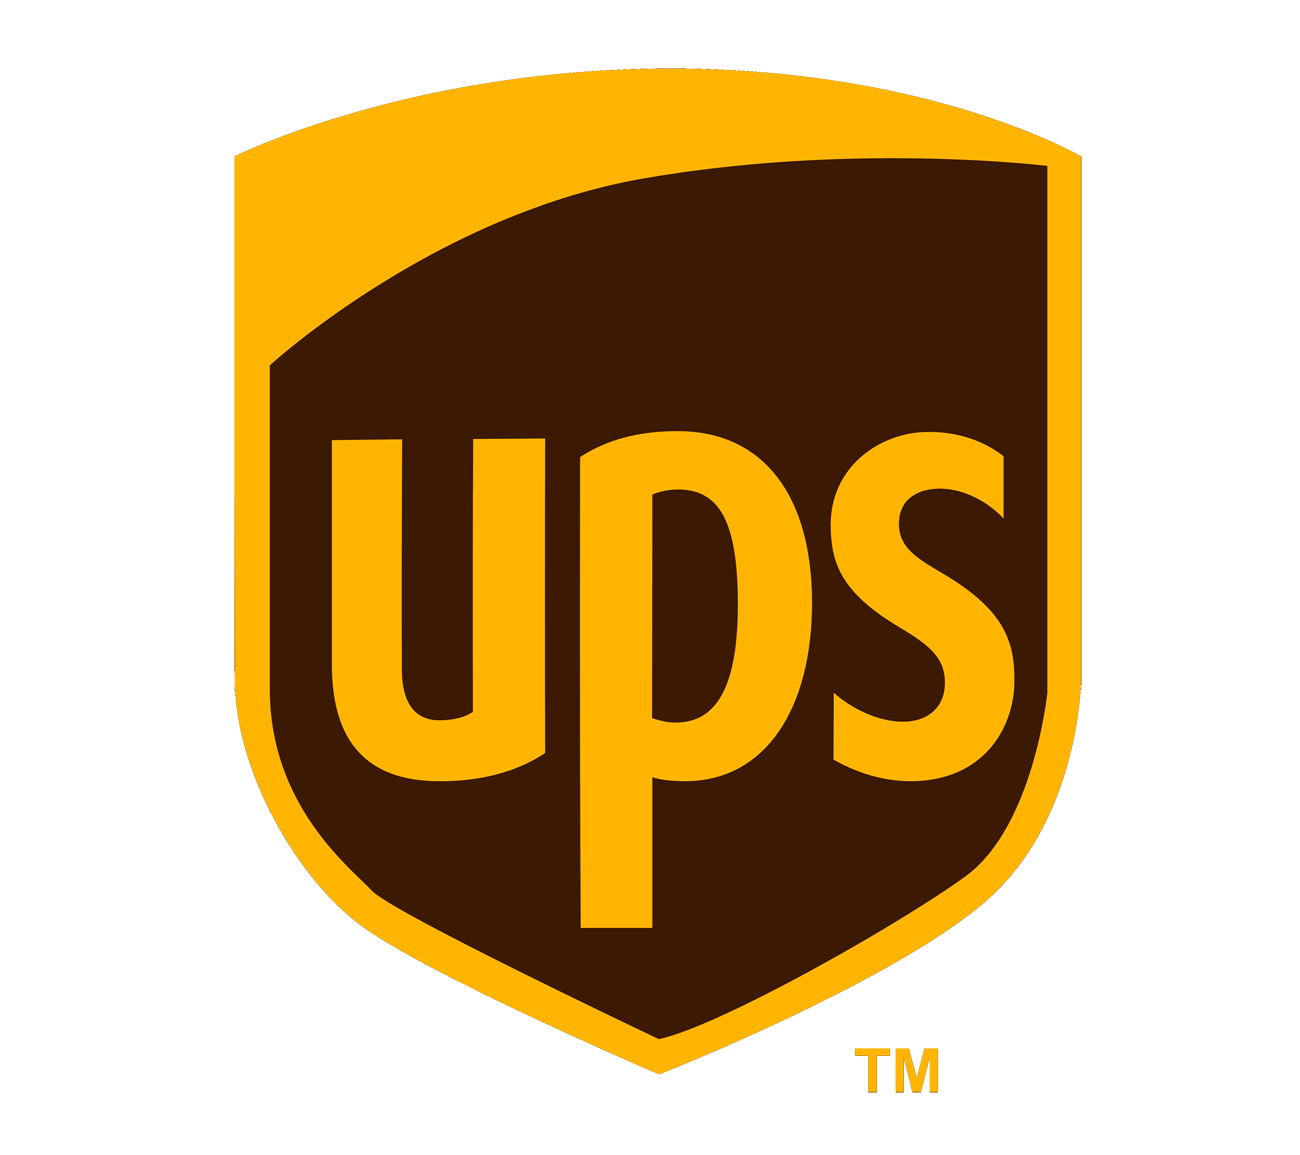 UPS - Small Parcel & Freight Shipping - CA_LGO_Brand 1 Corporate Logo